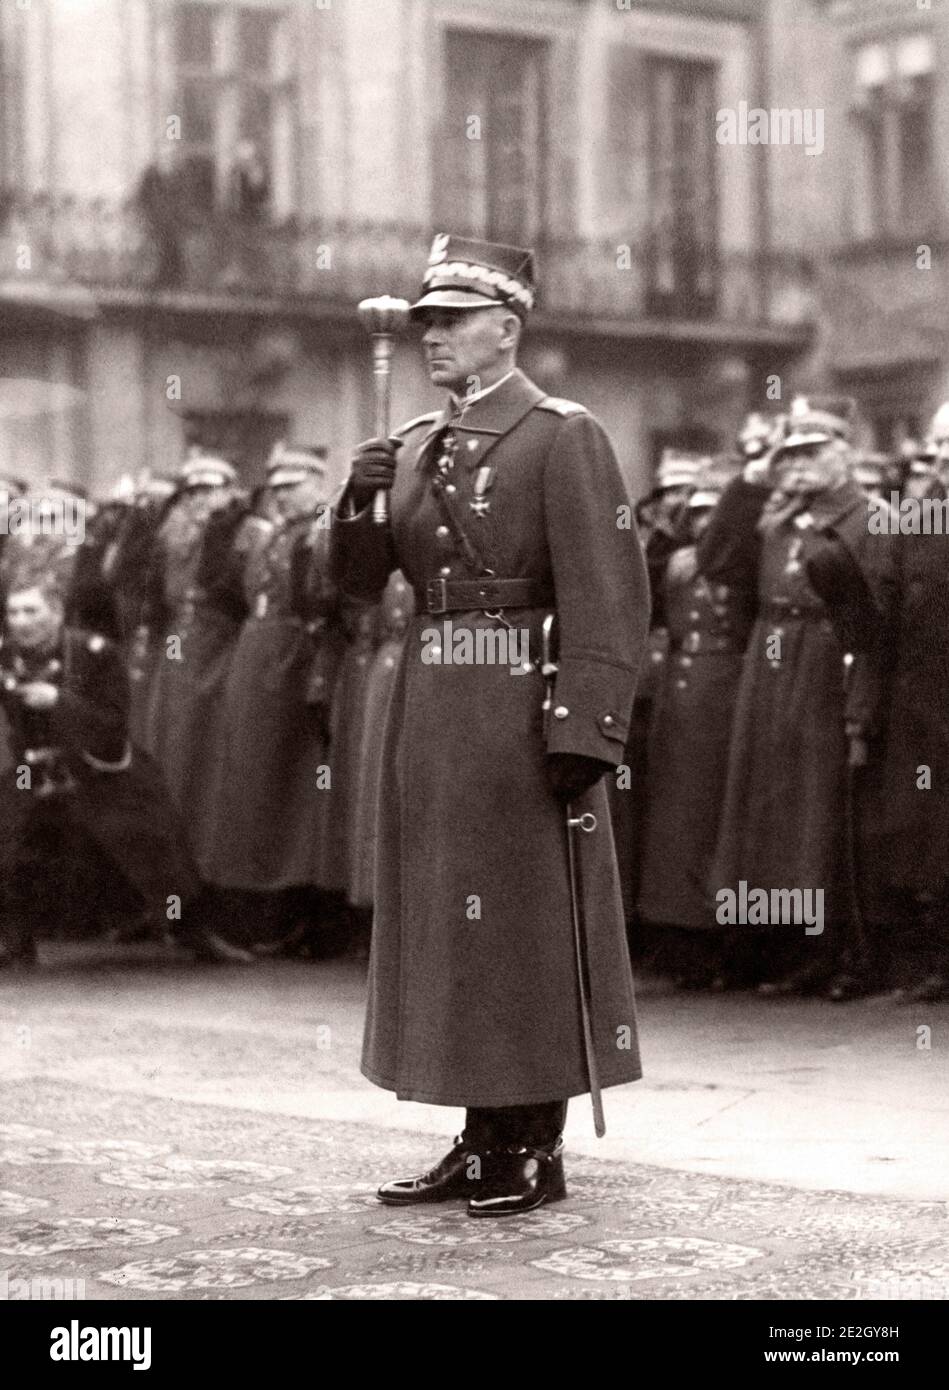 Portrait of Marshal Edward Rydz-Smigły (1886 – 1941), was a Polish politician, statesman, Marshal of Poland and Commander-in-Chief of Poland's armed f Stock Photo